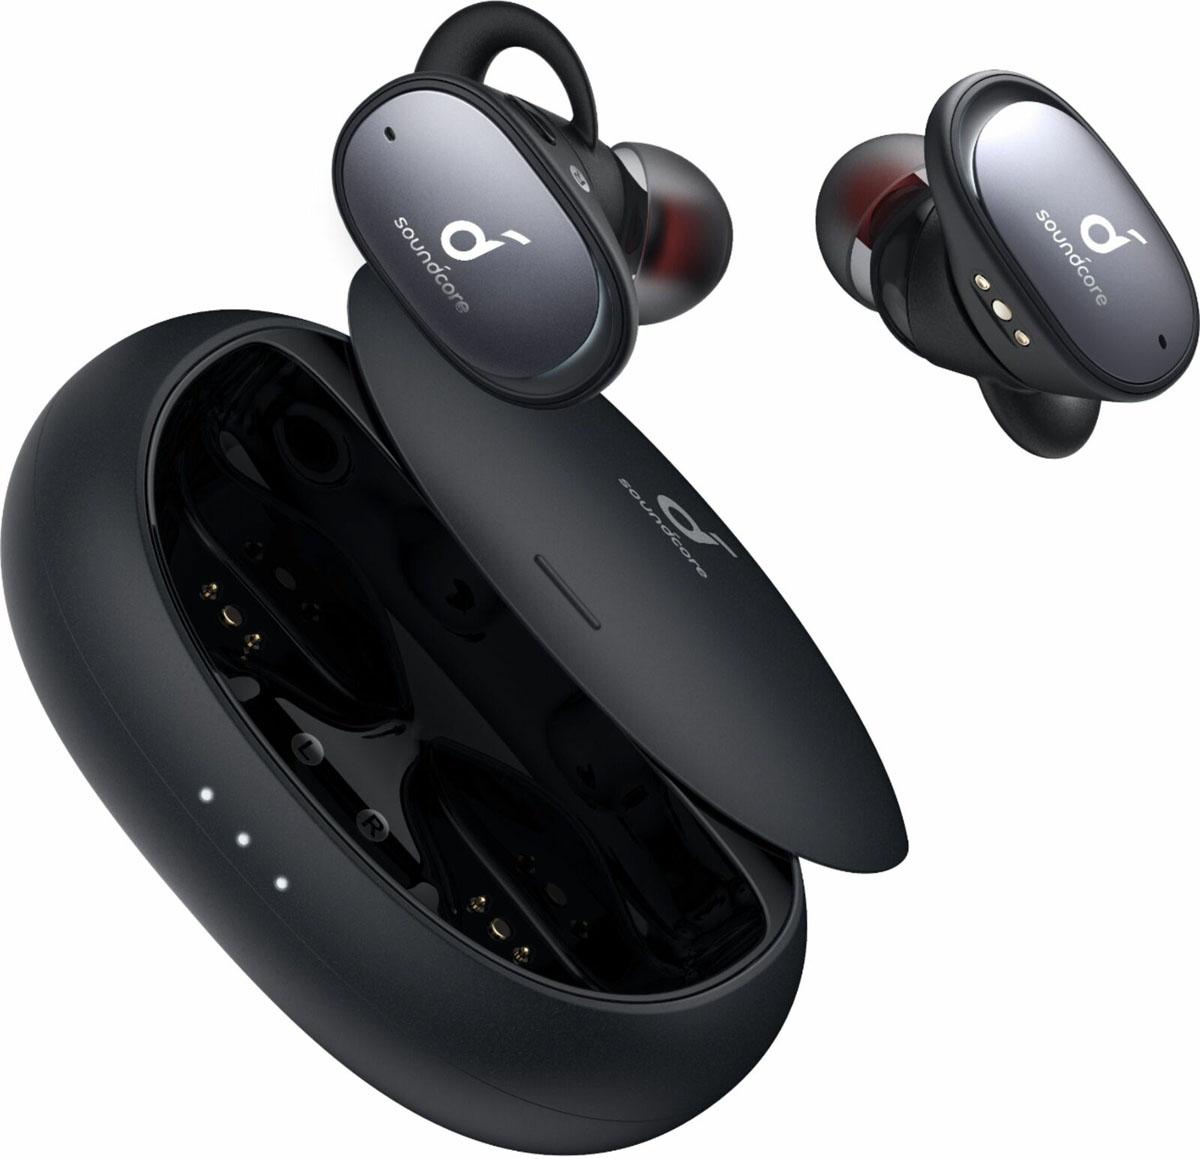 Anker Soundcore Liberty 2 Pro True Wireless Earbuds for $49.99 Shipped